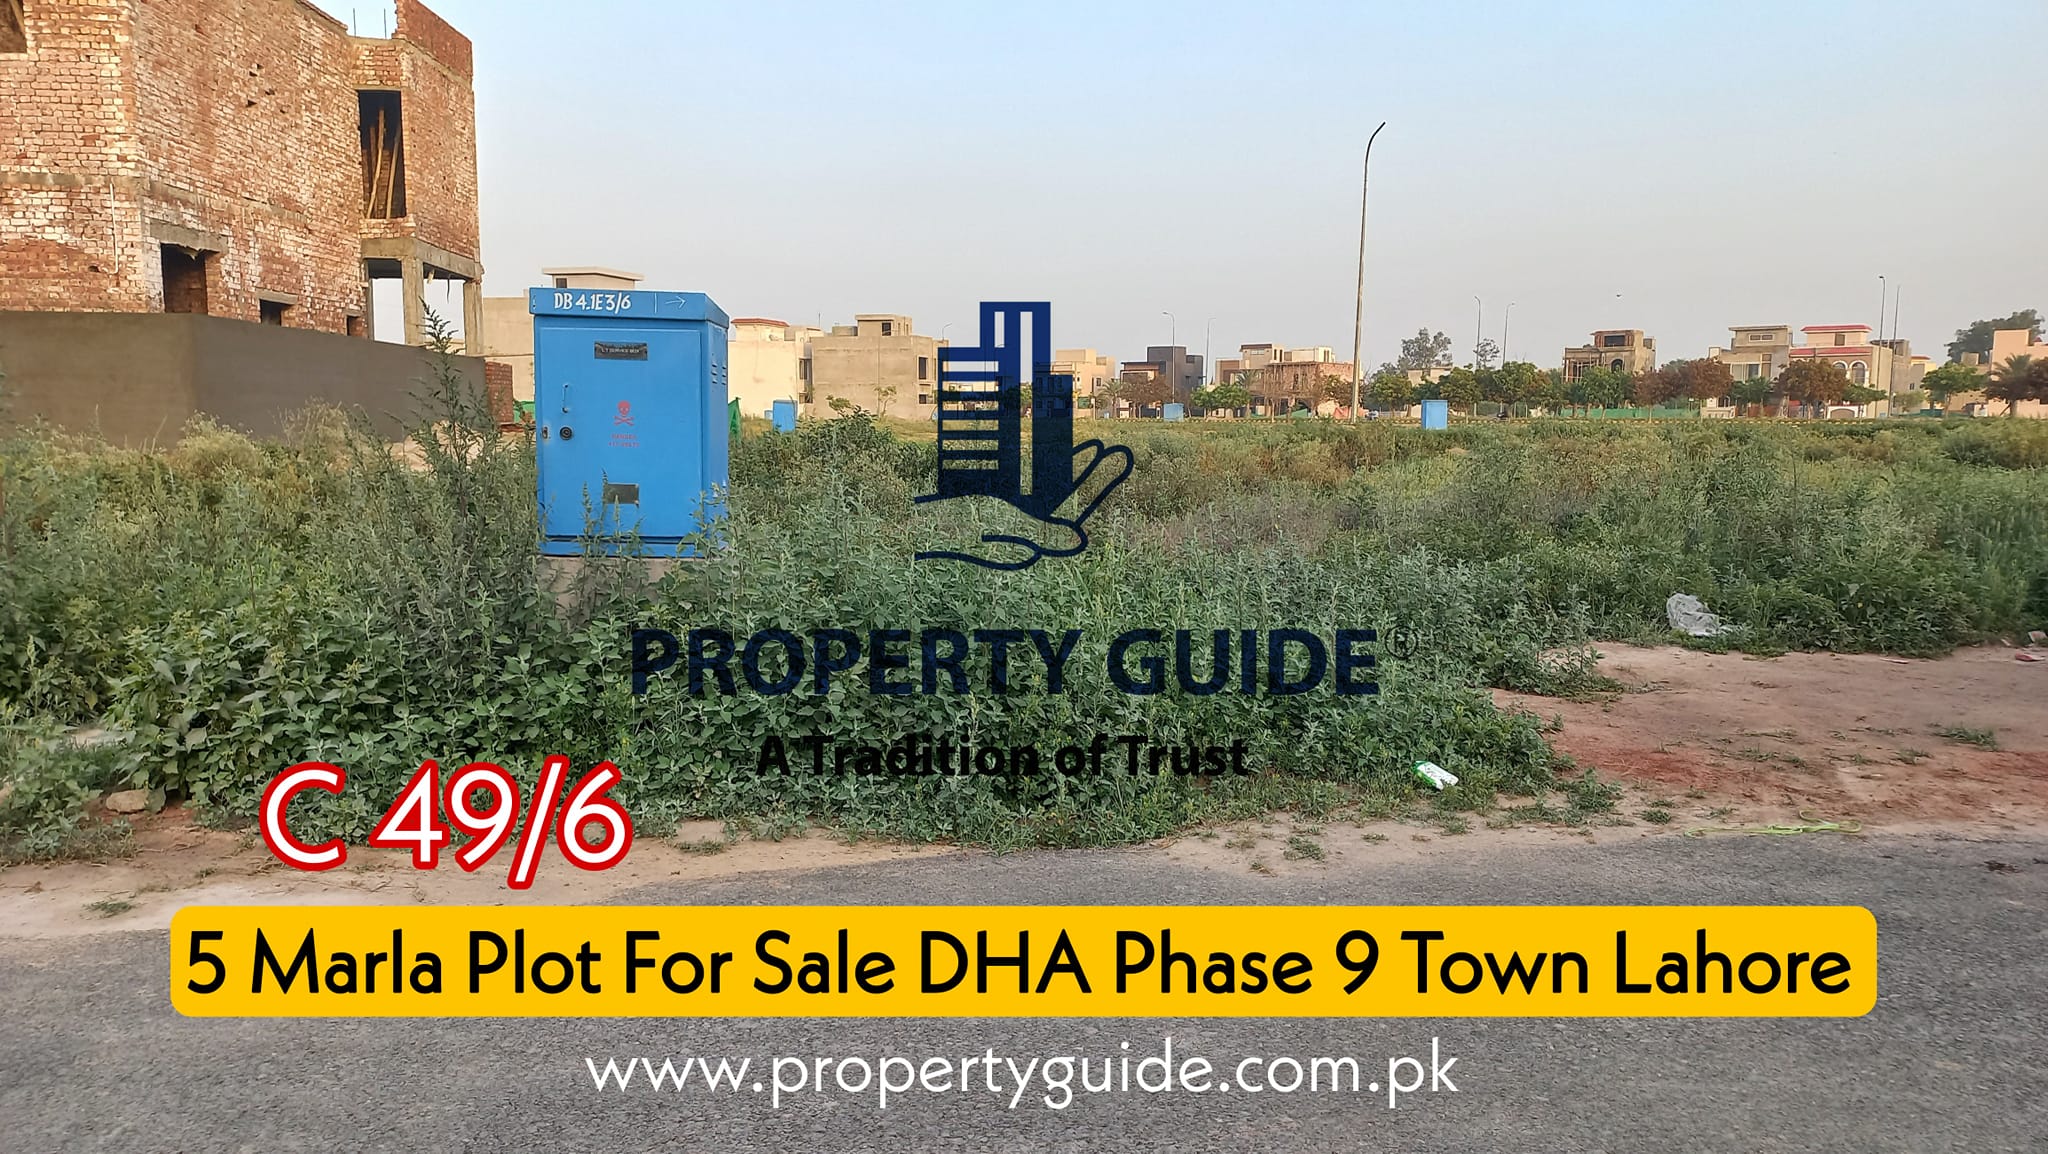 05 Marla Plot For Sale In DHA Phase 9 Town Lahore – C 49/6